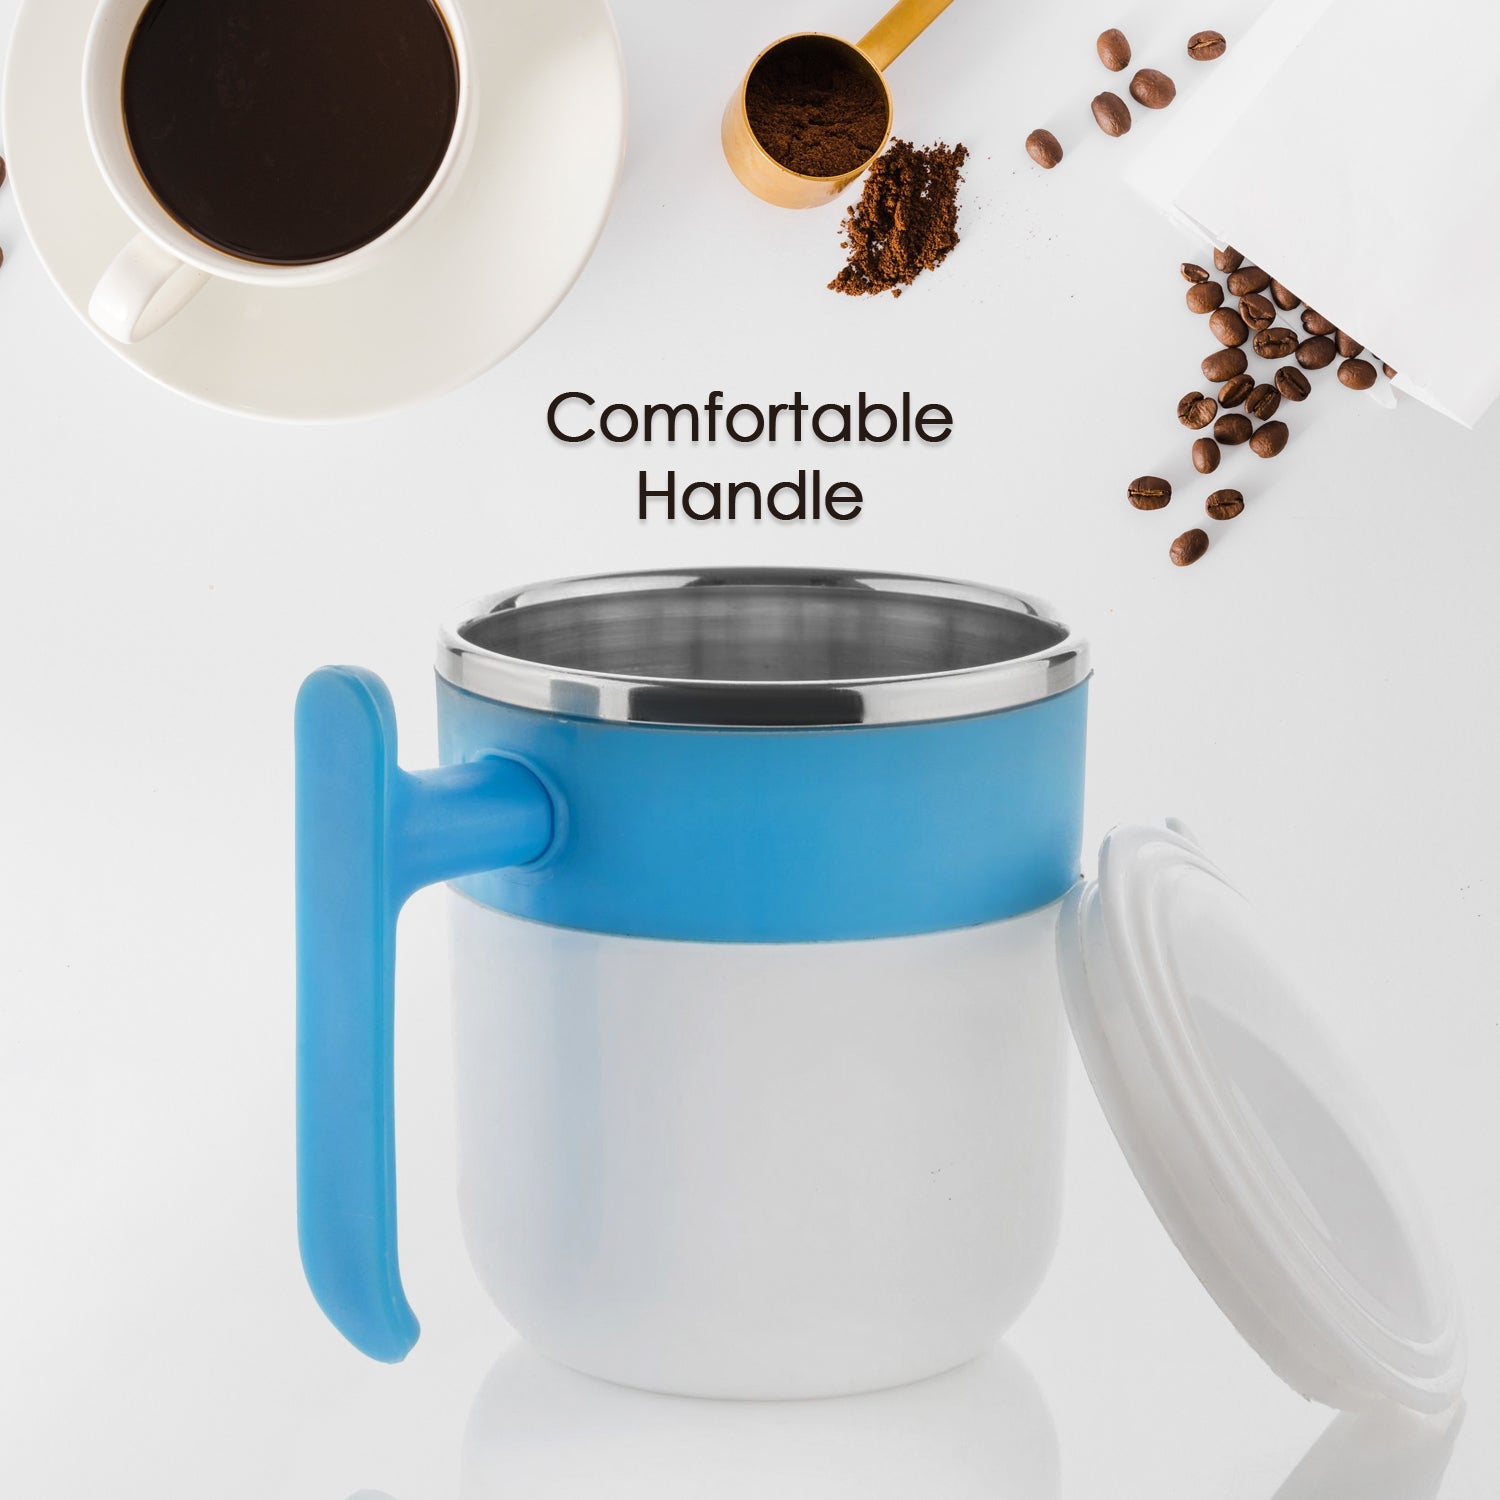 5767 Stainless Steel Lid Cover Hot Coffee/Tea Mug Hot Insulated Double Wall Stainless Steel, Coffee and Milk Cup with Lid - Coffee Cup (1 Pc ) - deal99.in